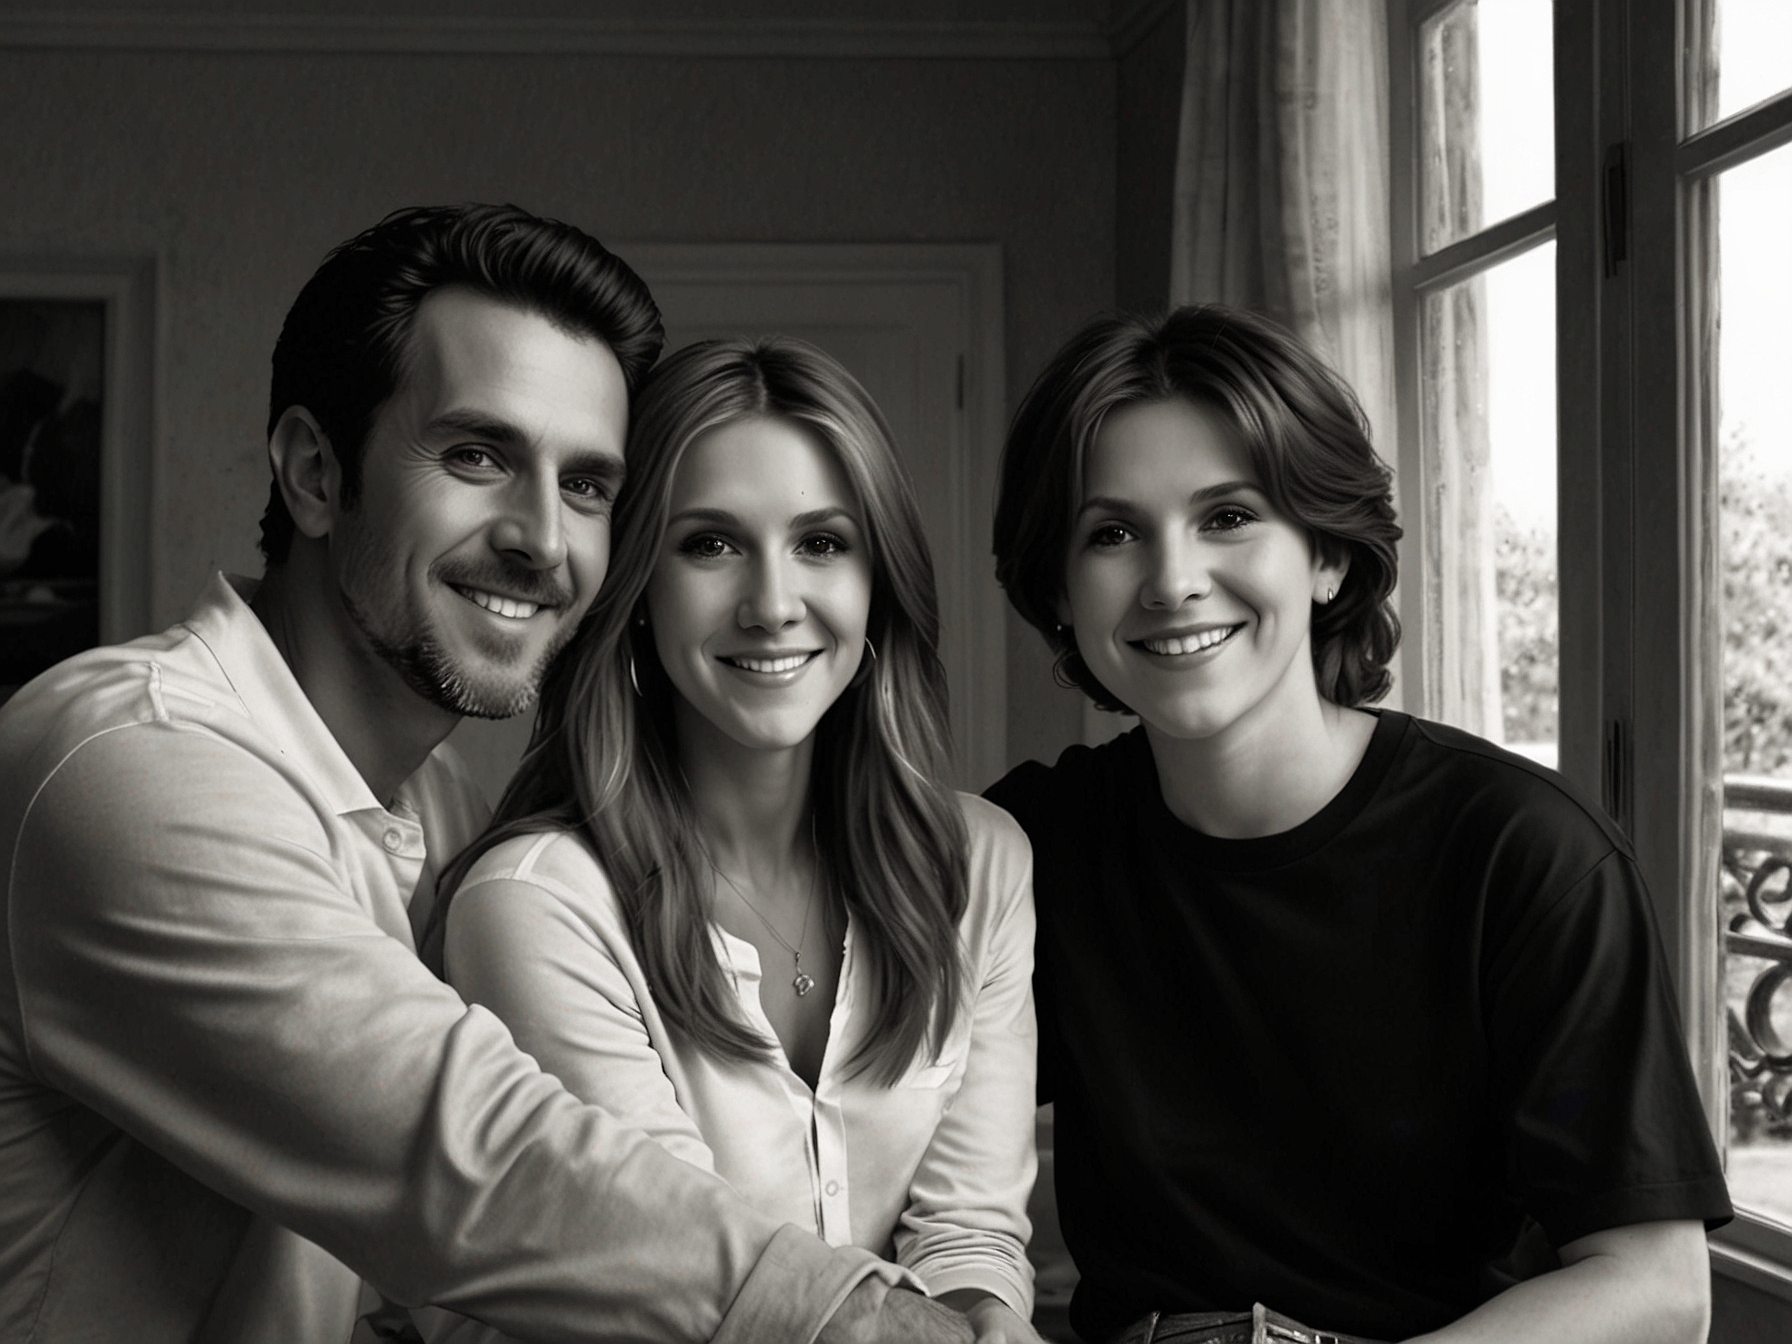 A touching family portrait featuring Céline Dion with her three children, René-Charles, Eddy, and Nelson, capturing the deep bond and love they share while navigating life’s challenges together.